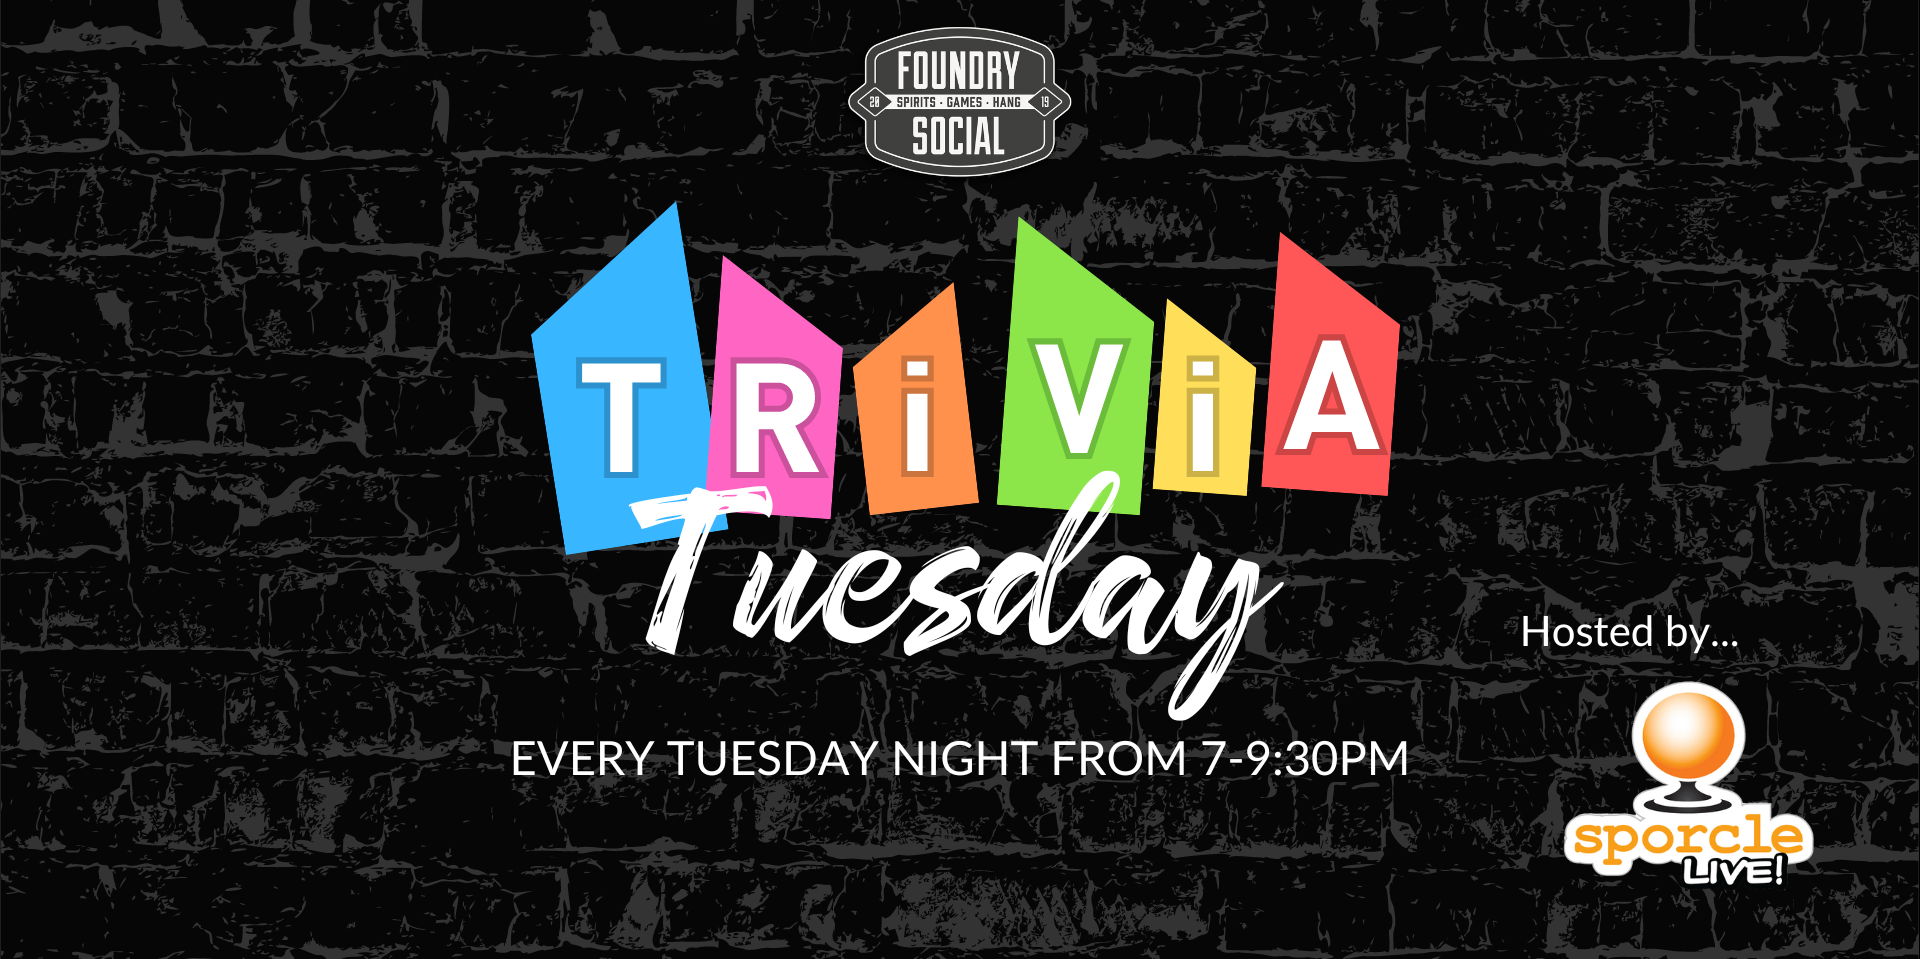 Trivia Tuesday at Foundry Social promotional image